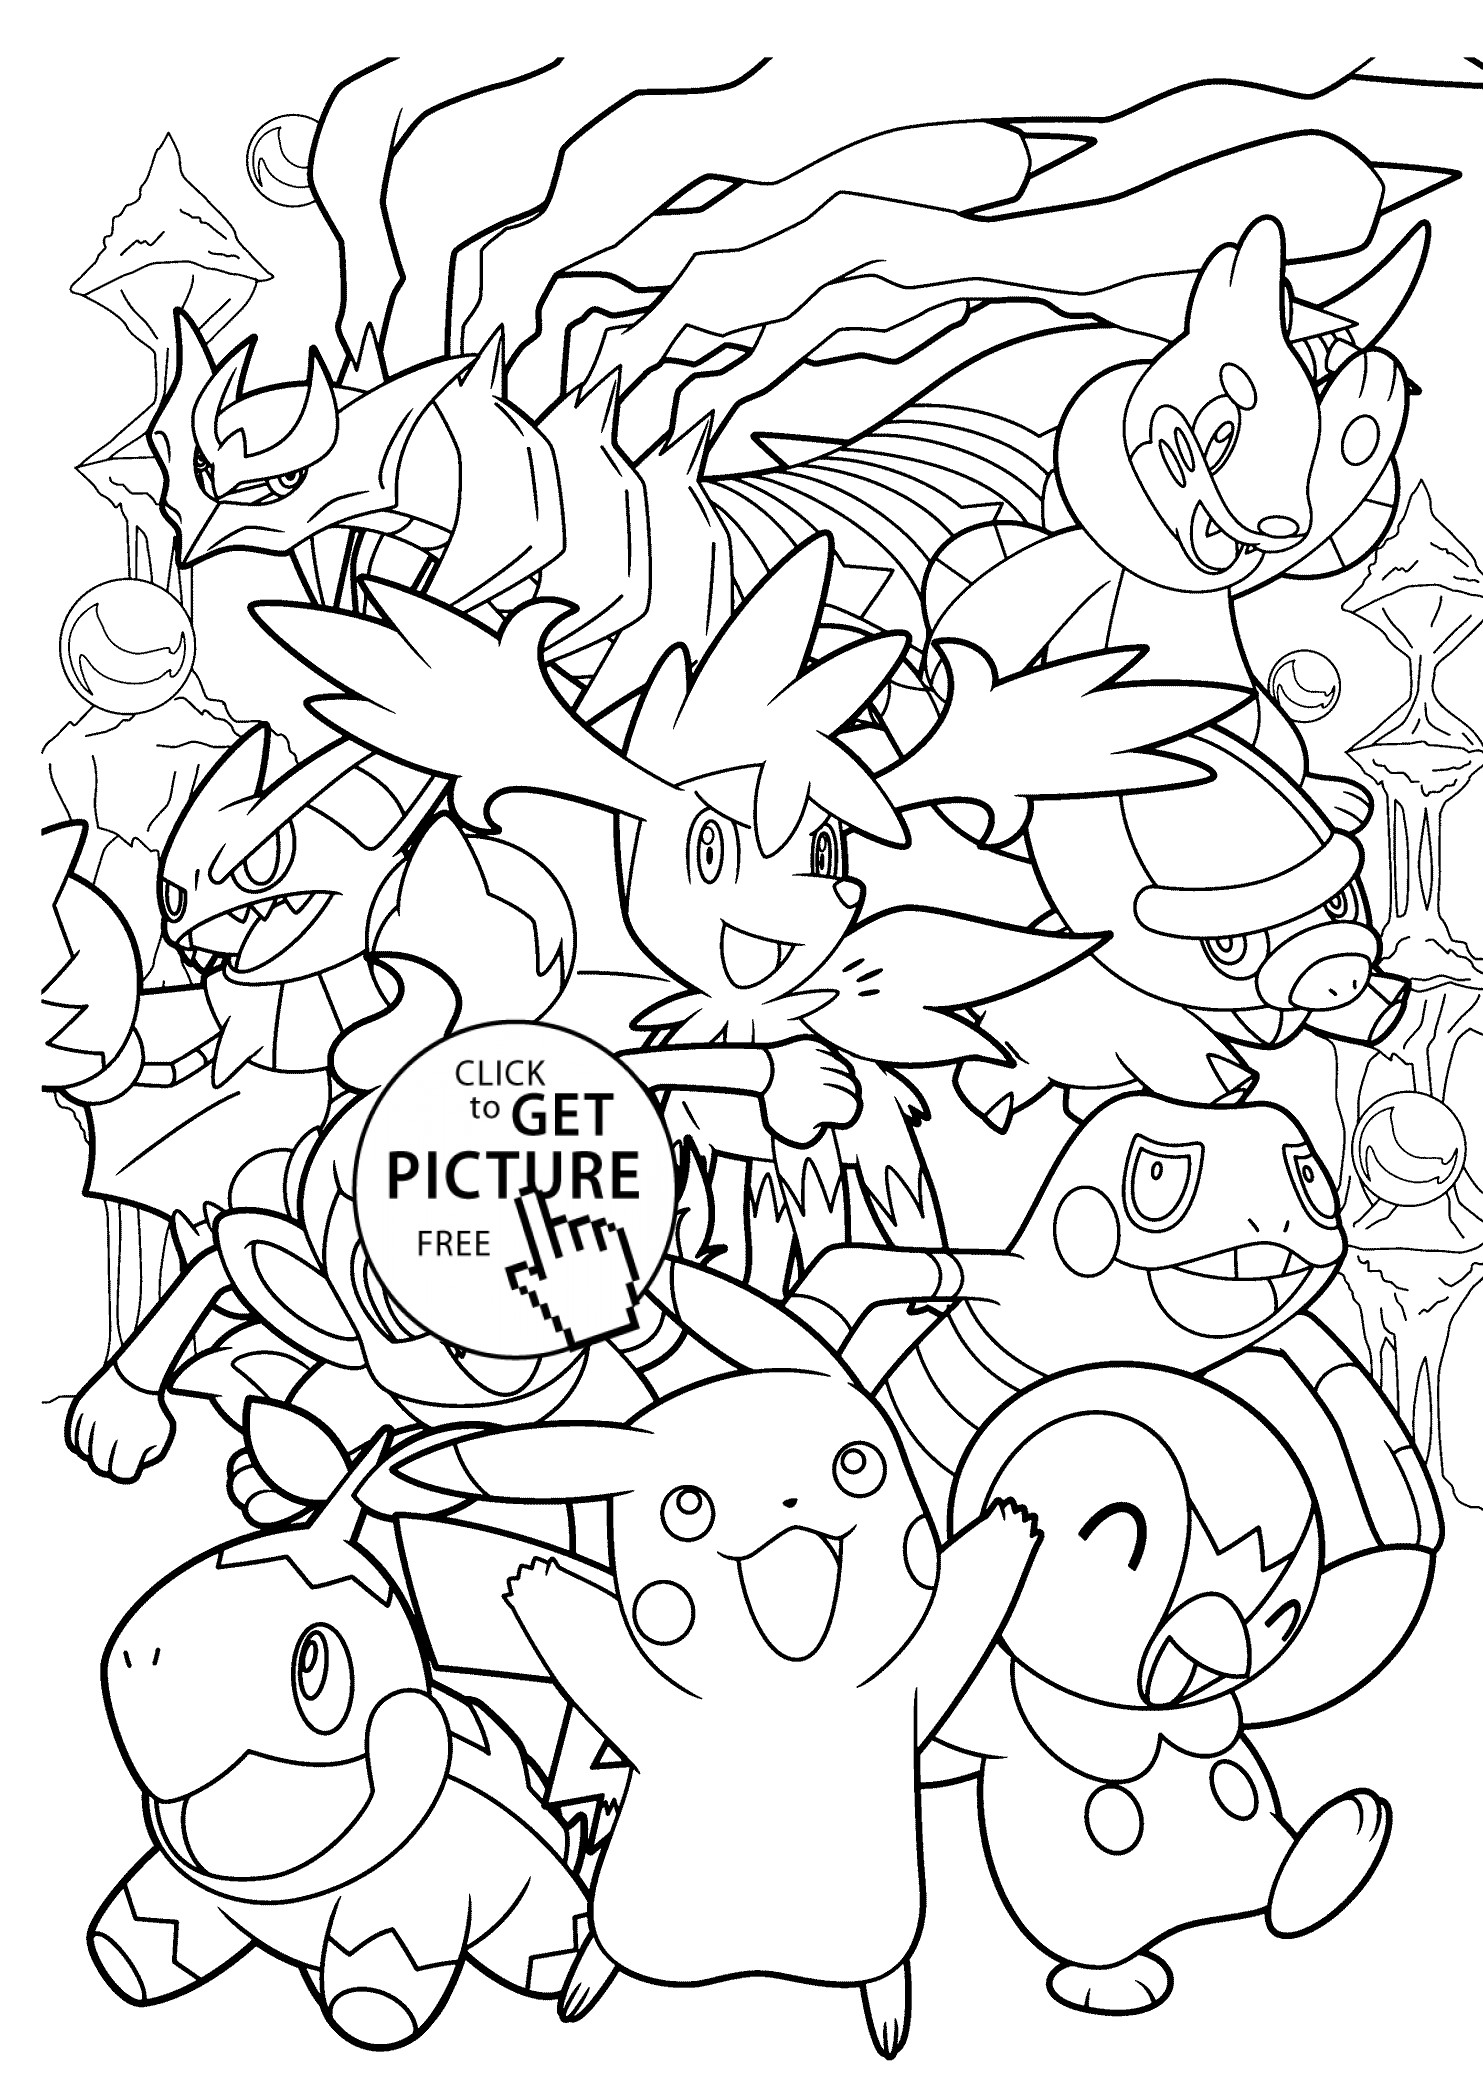 Luxury Pokemon Coloring Pages 92 Free Coloring Book with Pokemon Coloring Pages